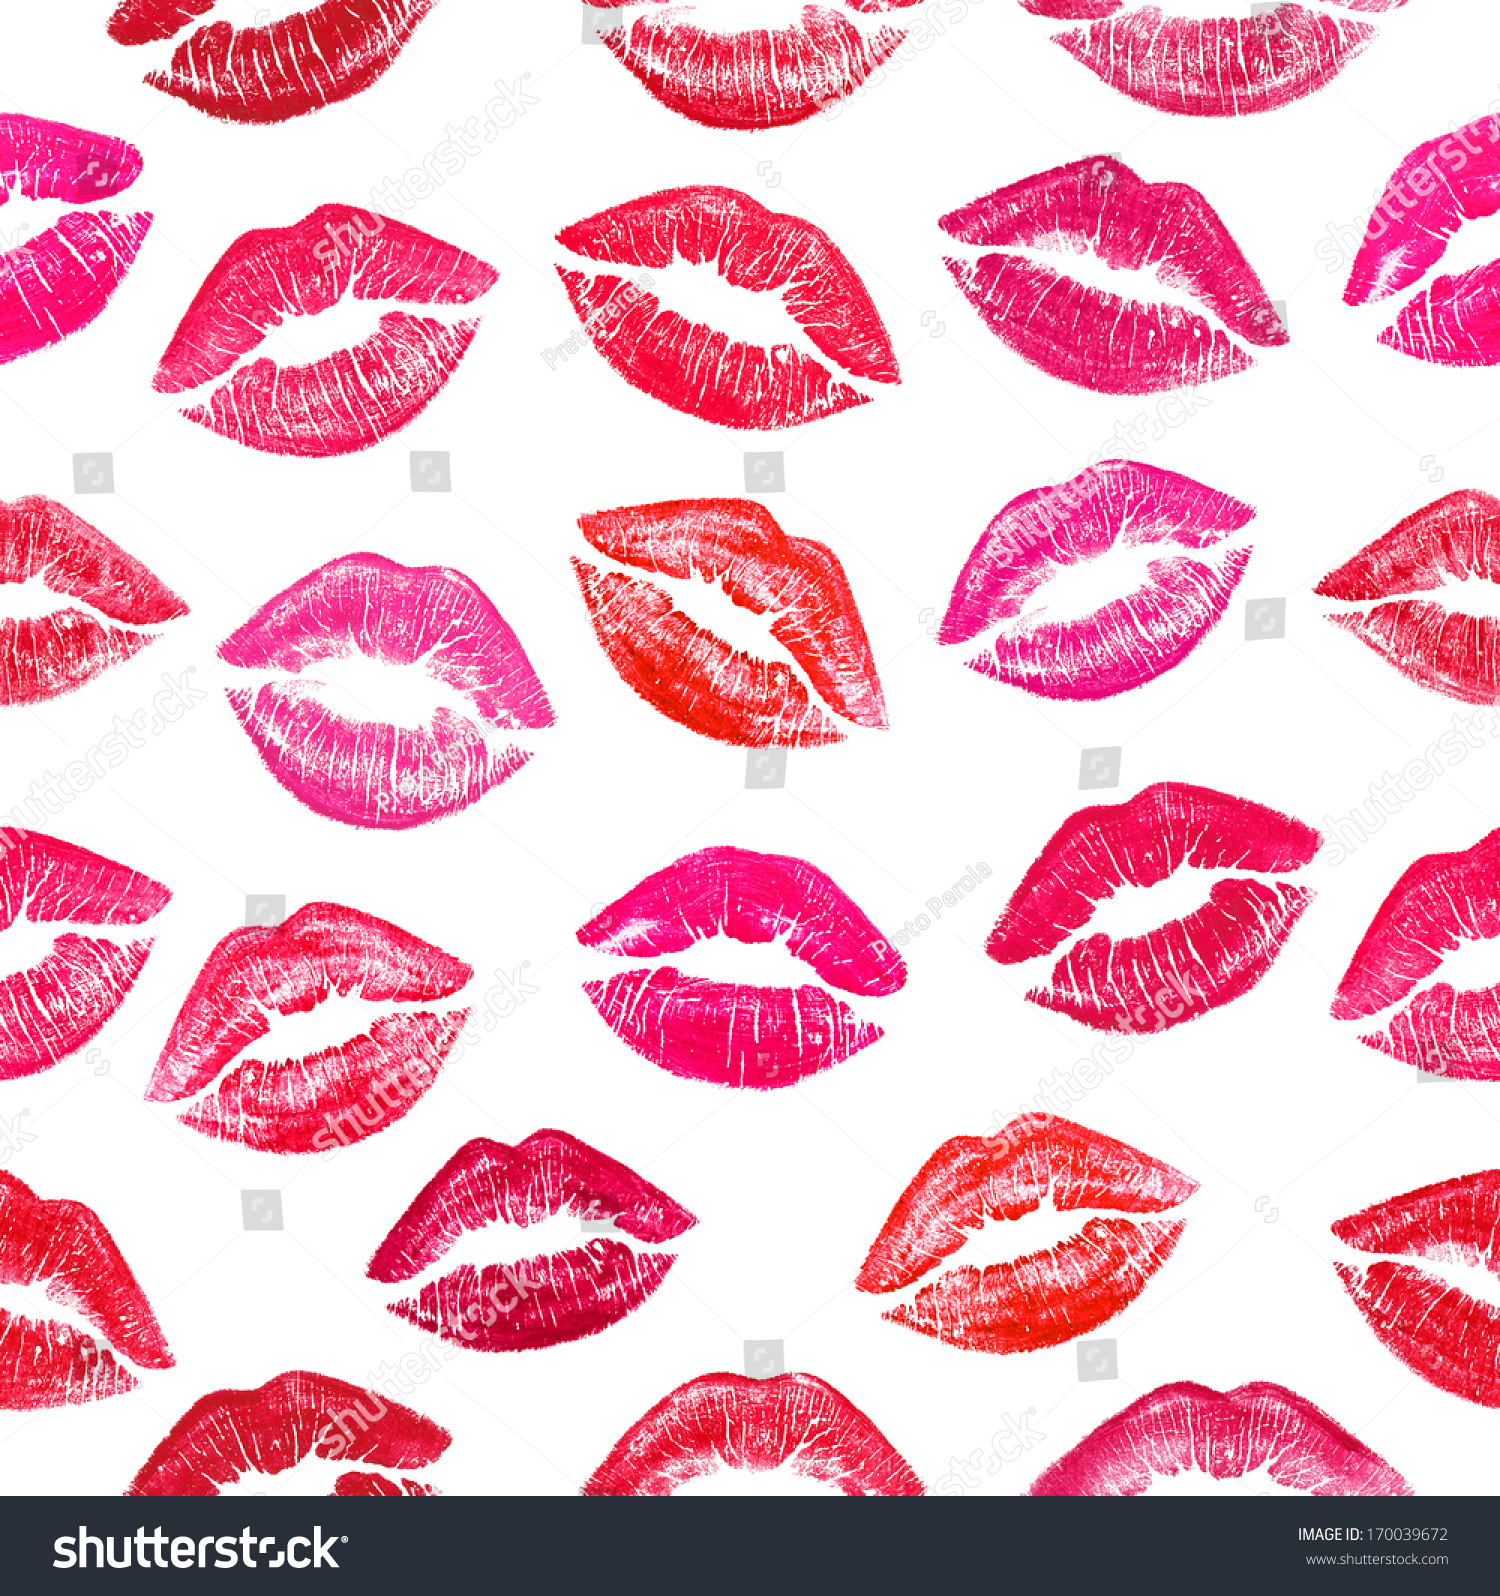 Beautiful Red Lips On White Seamless Background Stock